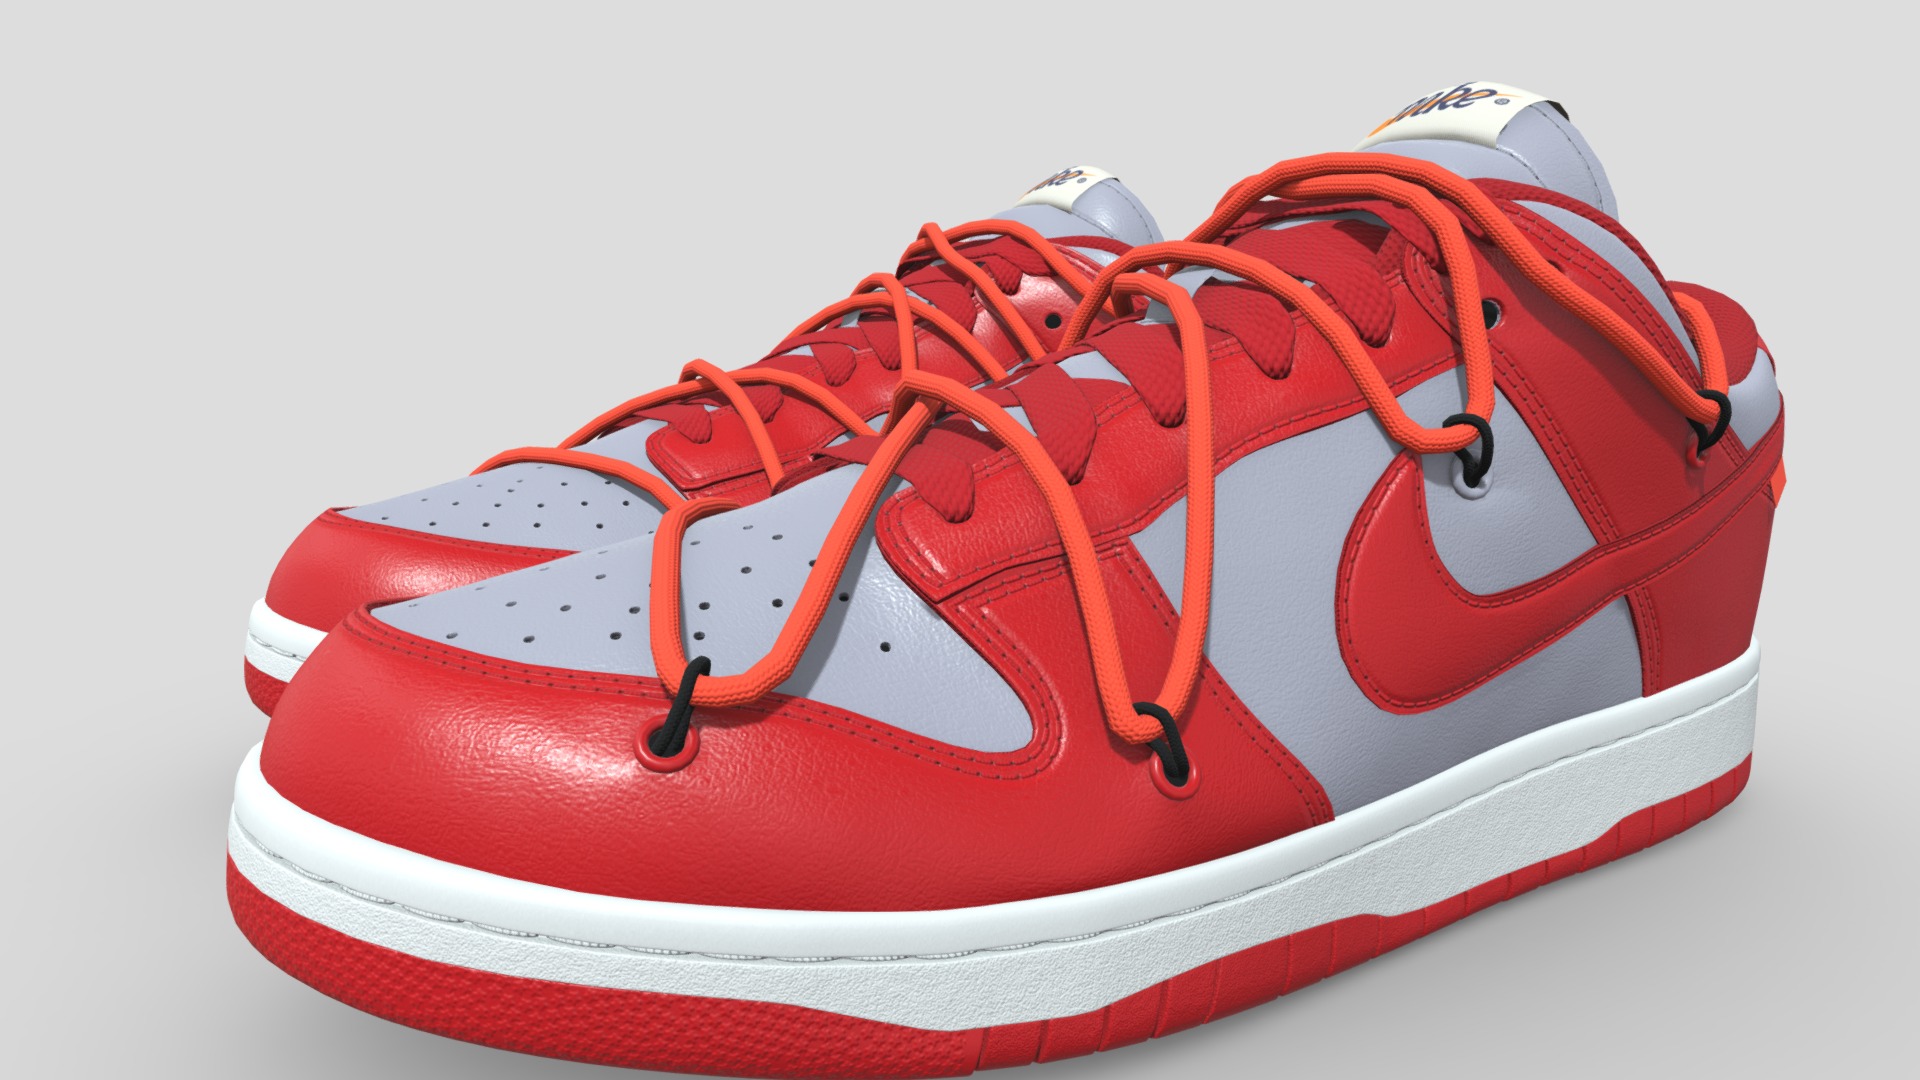 3D model Nike Dunk Low Off-White University Red - This is a 3D model of the Nike Dunk Low Off-White University Red. The 3D model is about a pair of red sneakers.